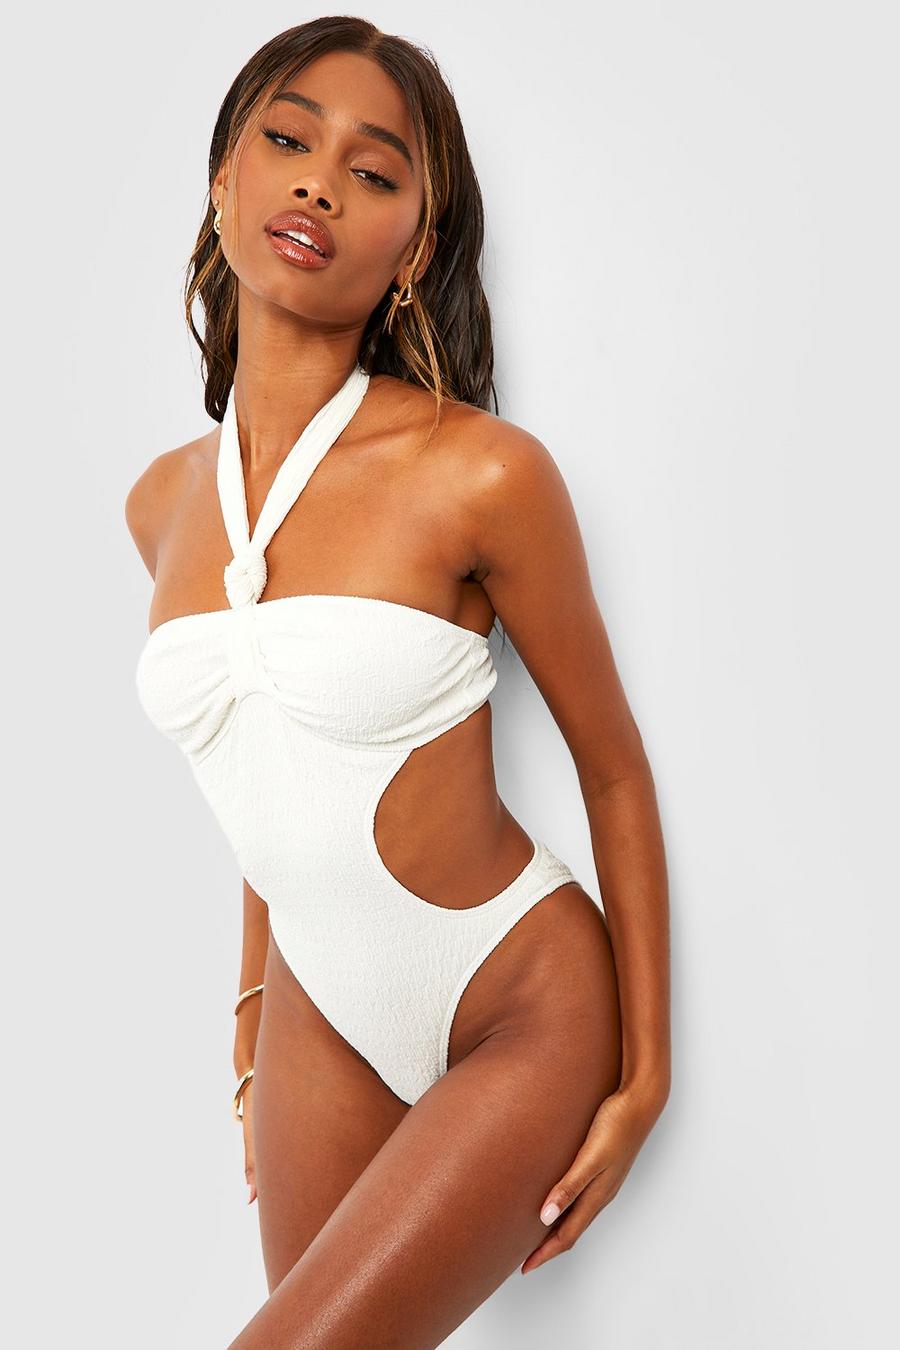 ASOS DESIGN Fuller Bust tie front cut out swimsuit in black